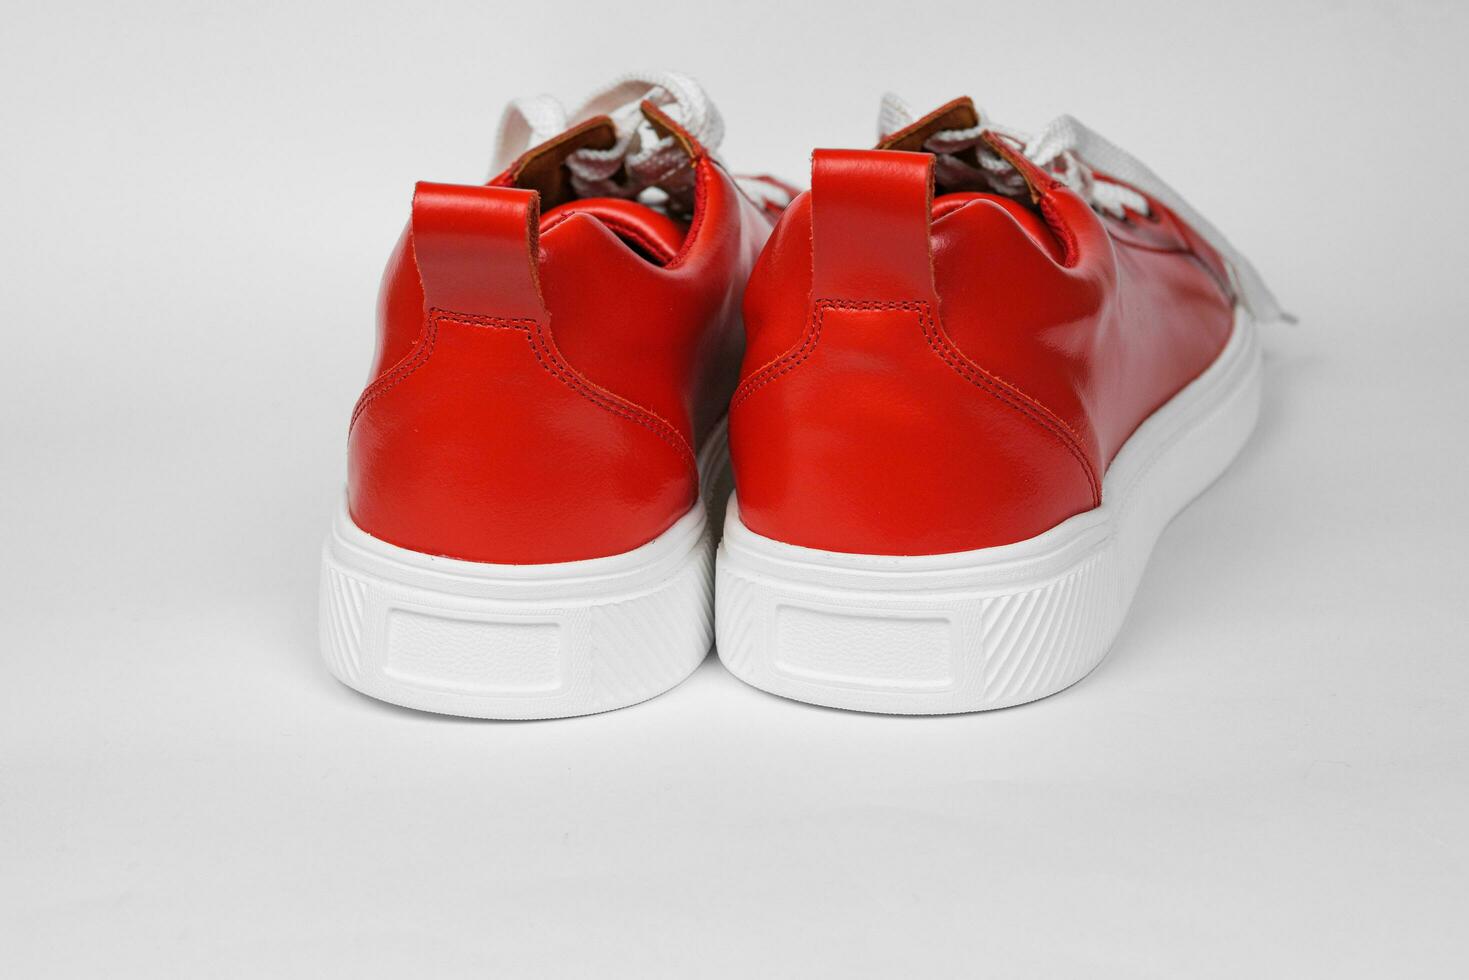 Red leather sneakers with white soles photo